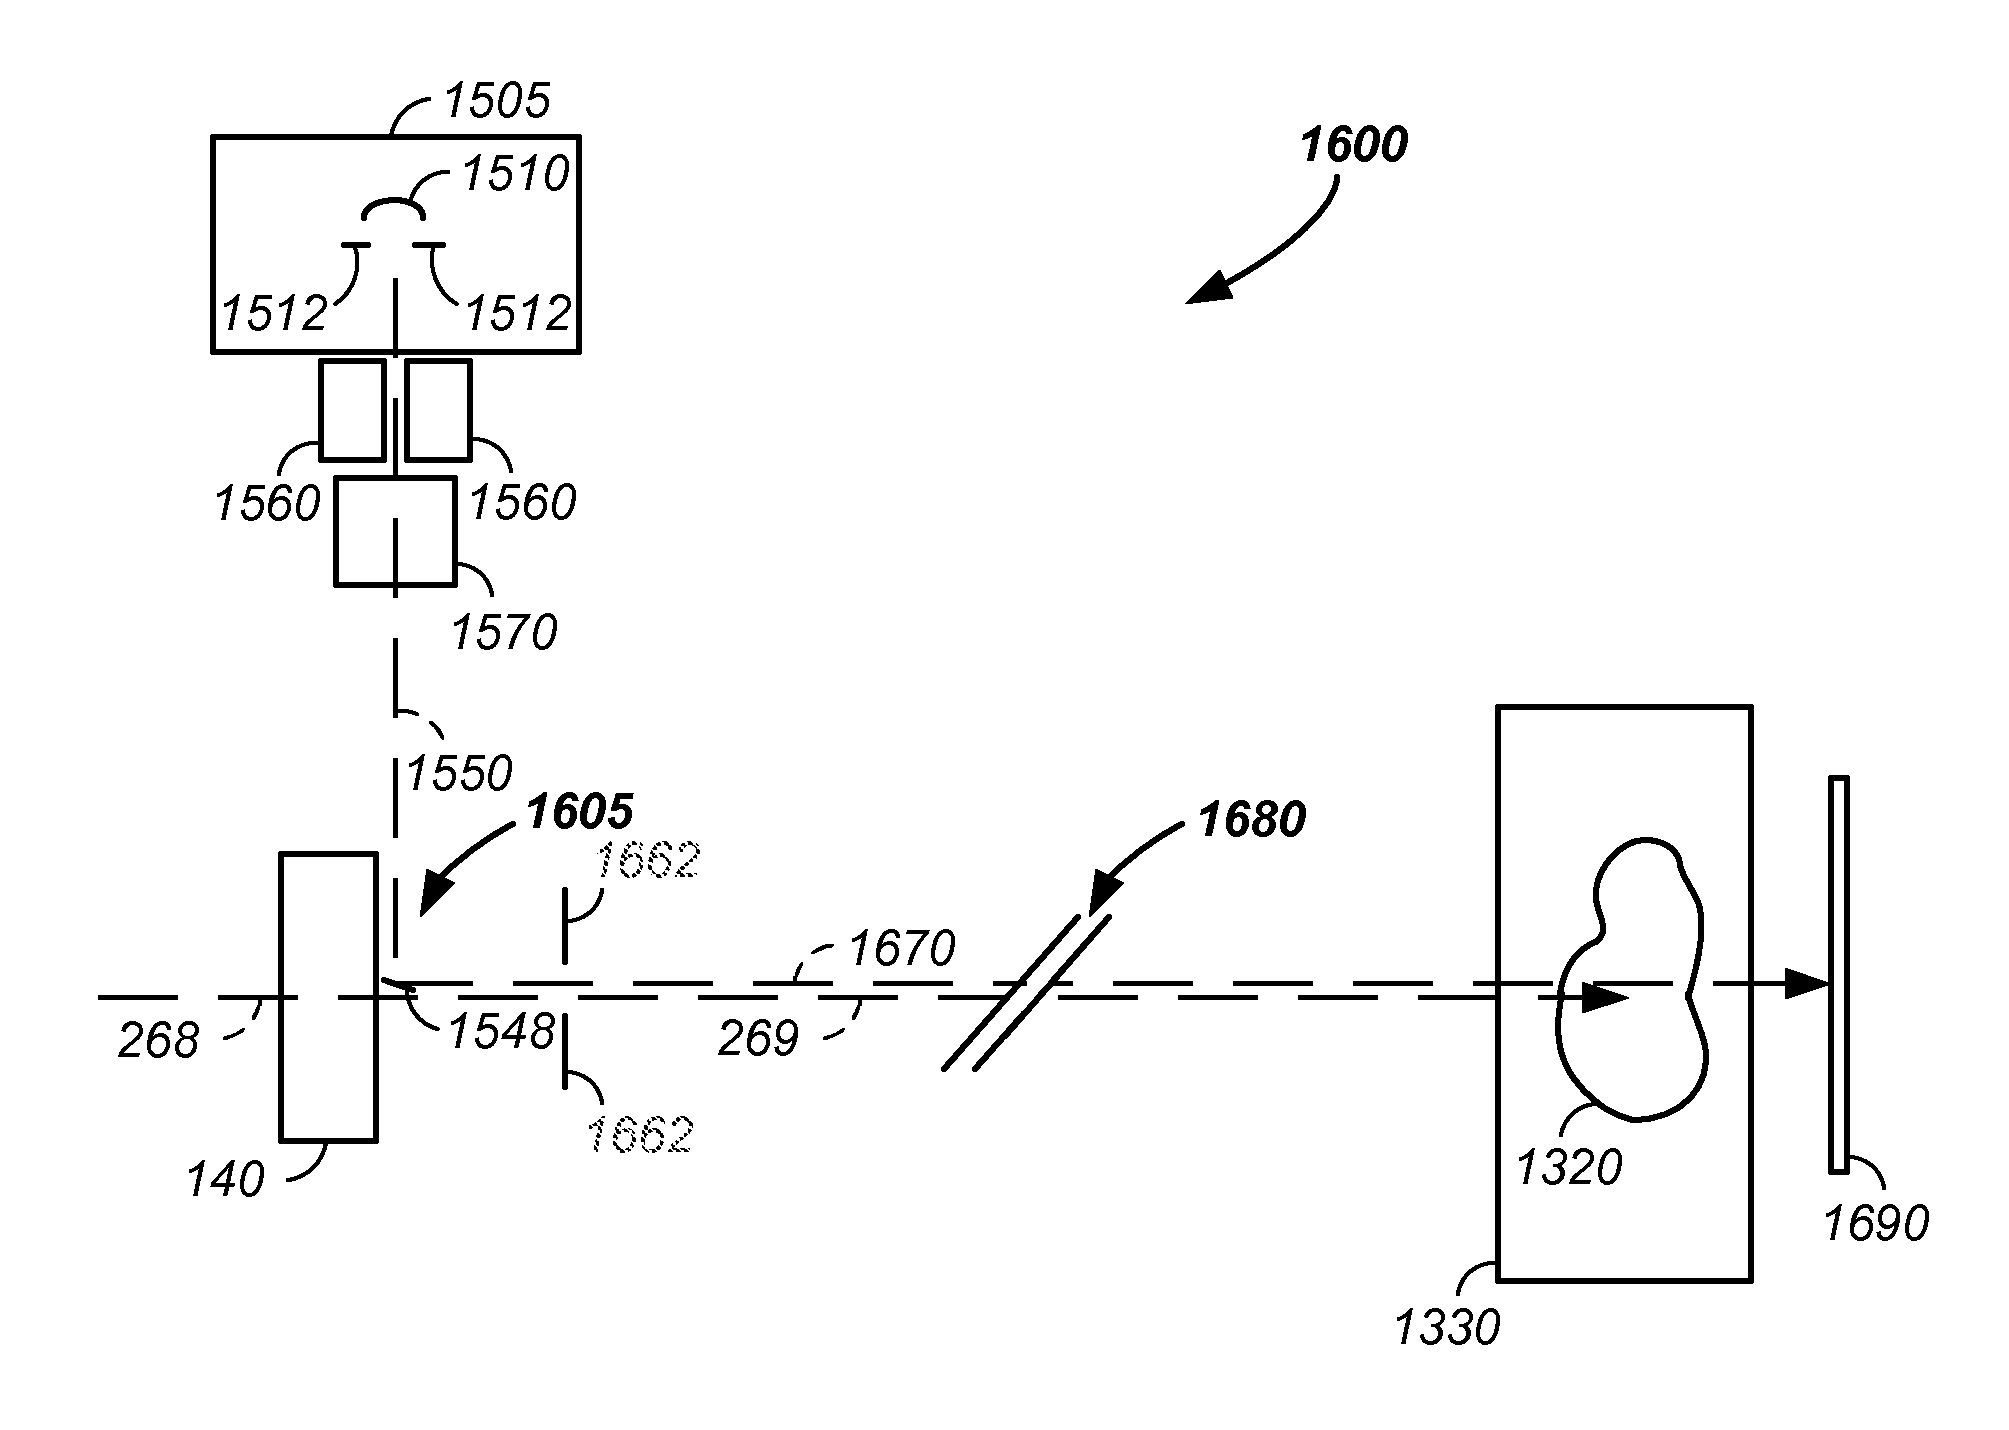 X-ray tomography method and apparatus used in conjunction with a charged particle cancer therapy system